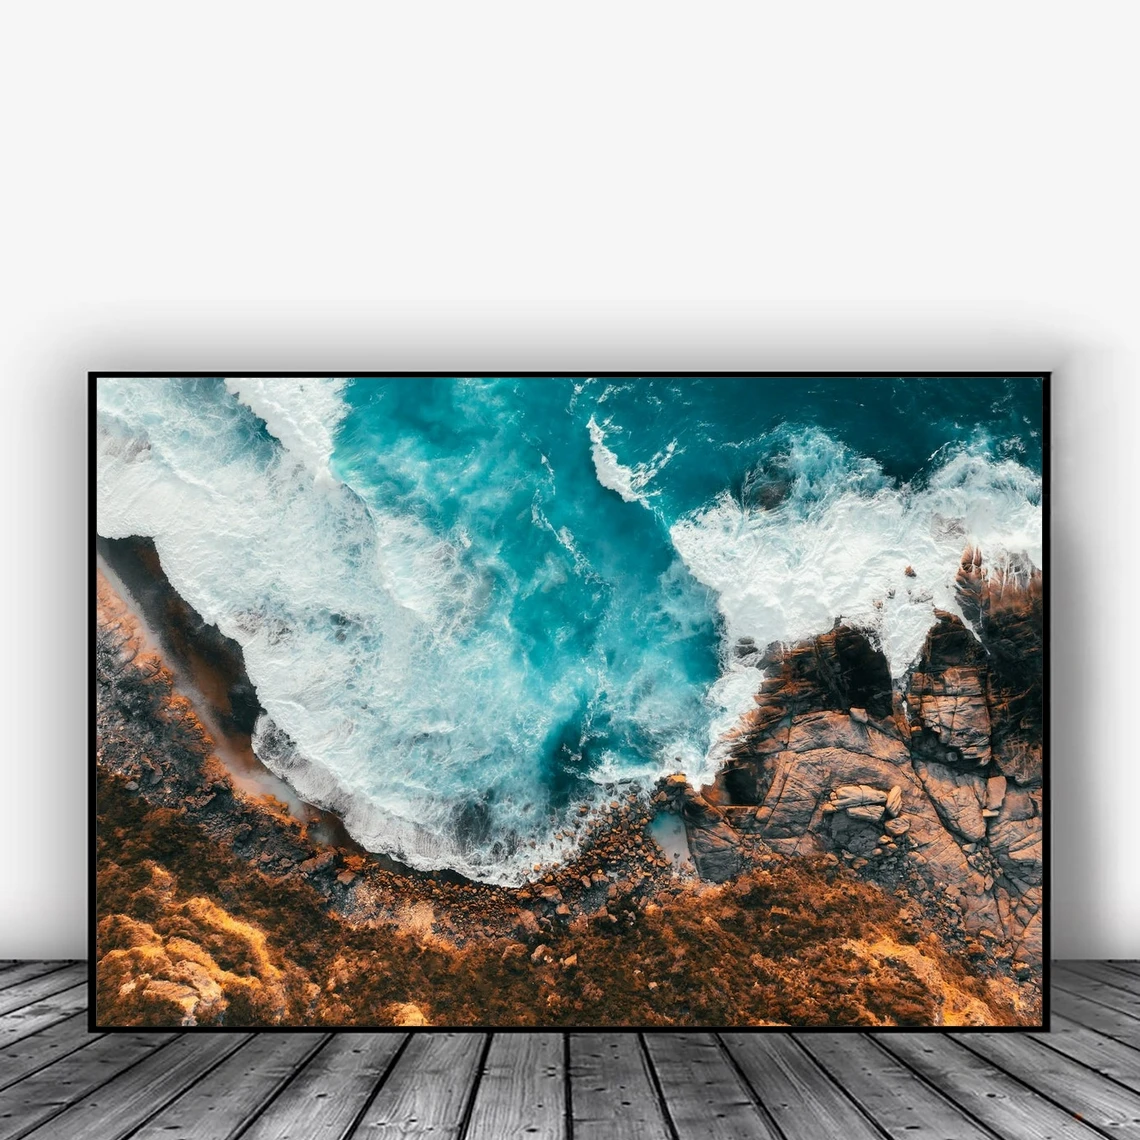 

Ocean waves crashing into rocks Print, Aerial photography beach poster, beach wall art from Western Australia Landscape Poster